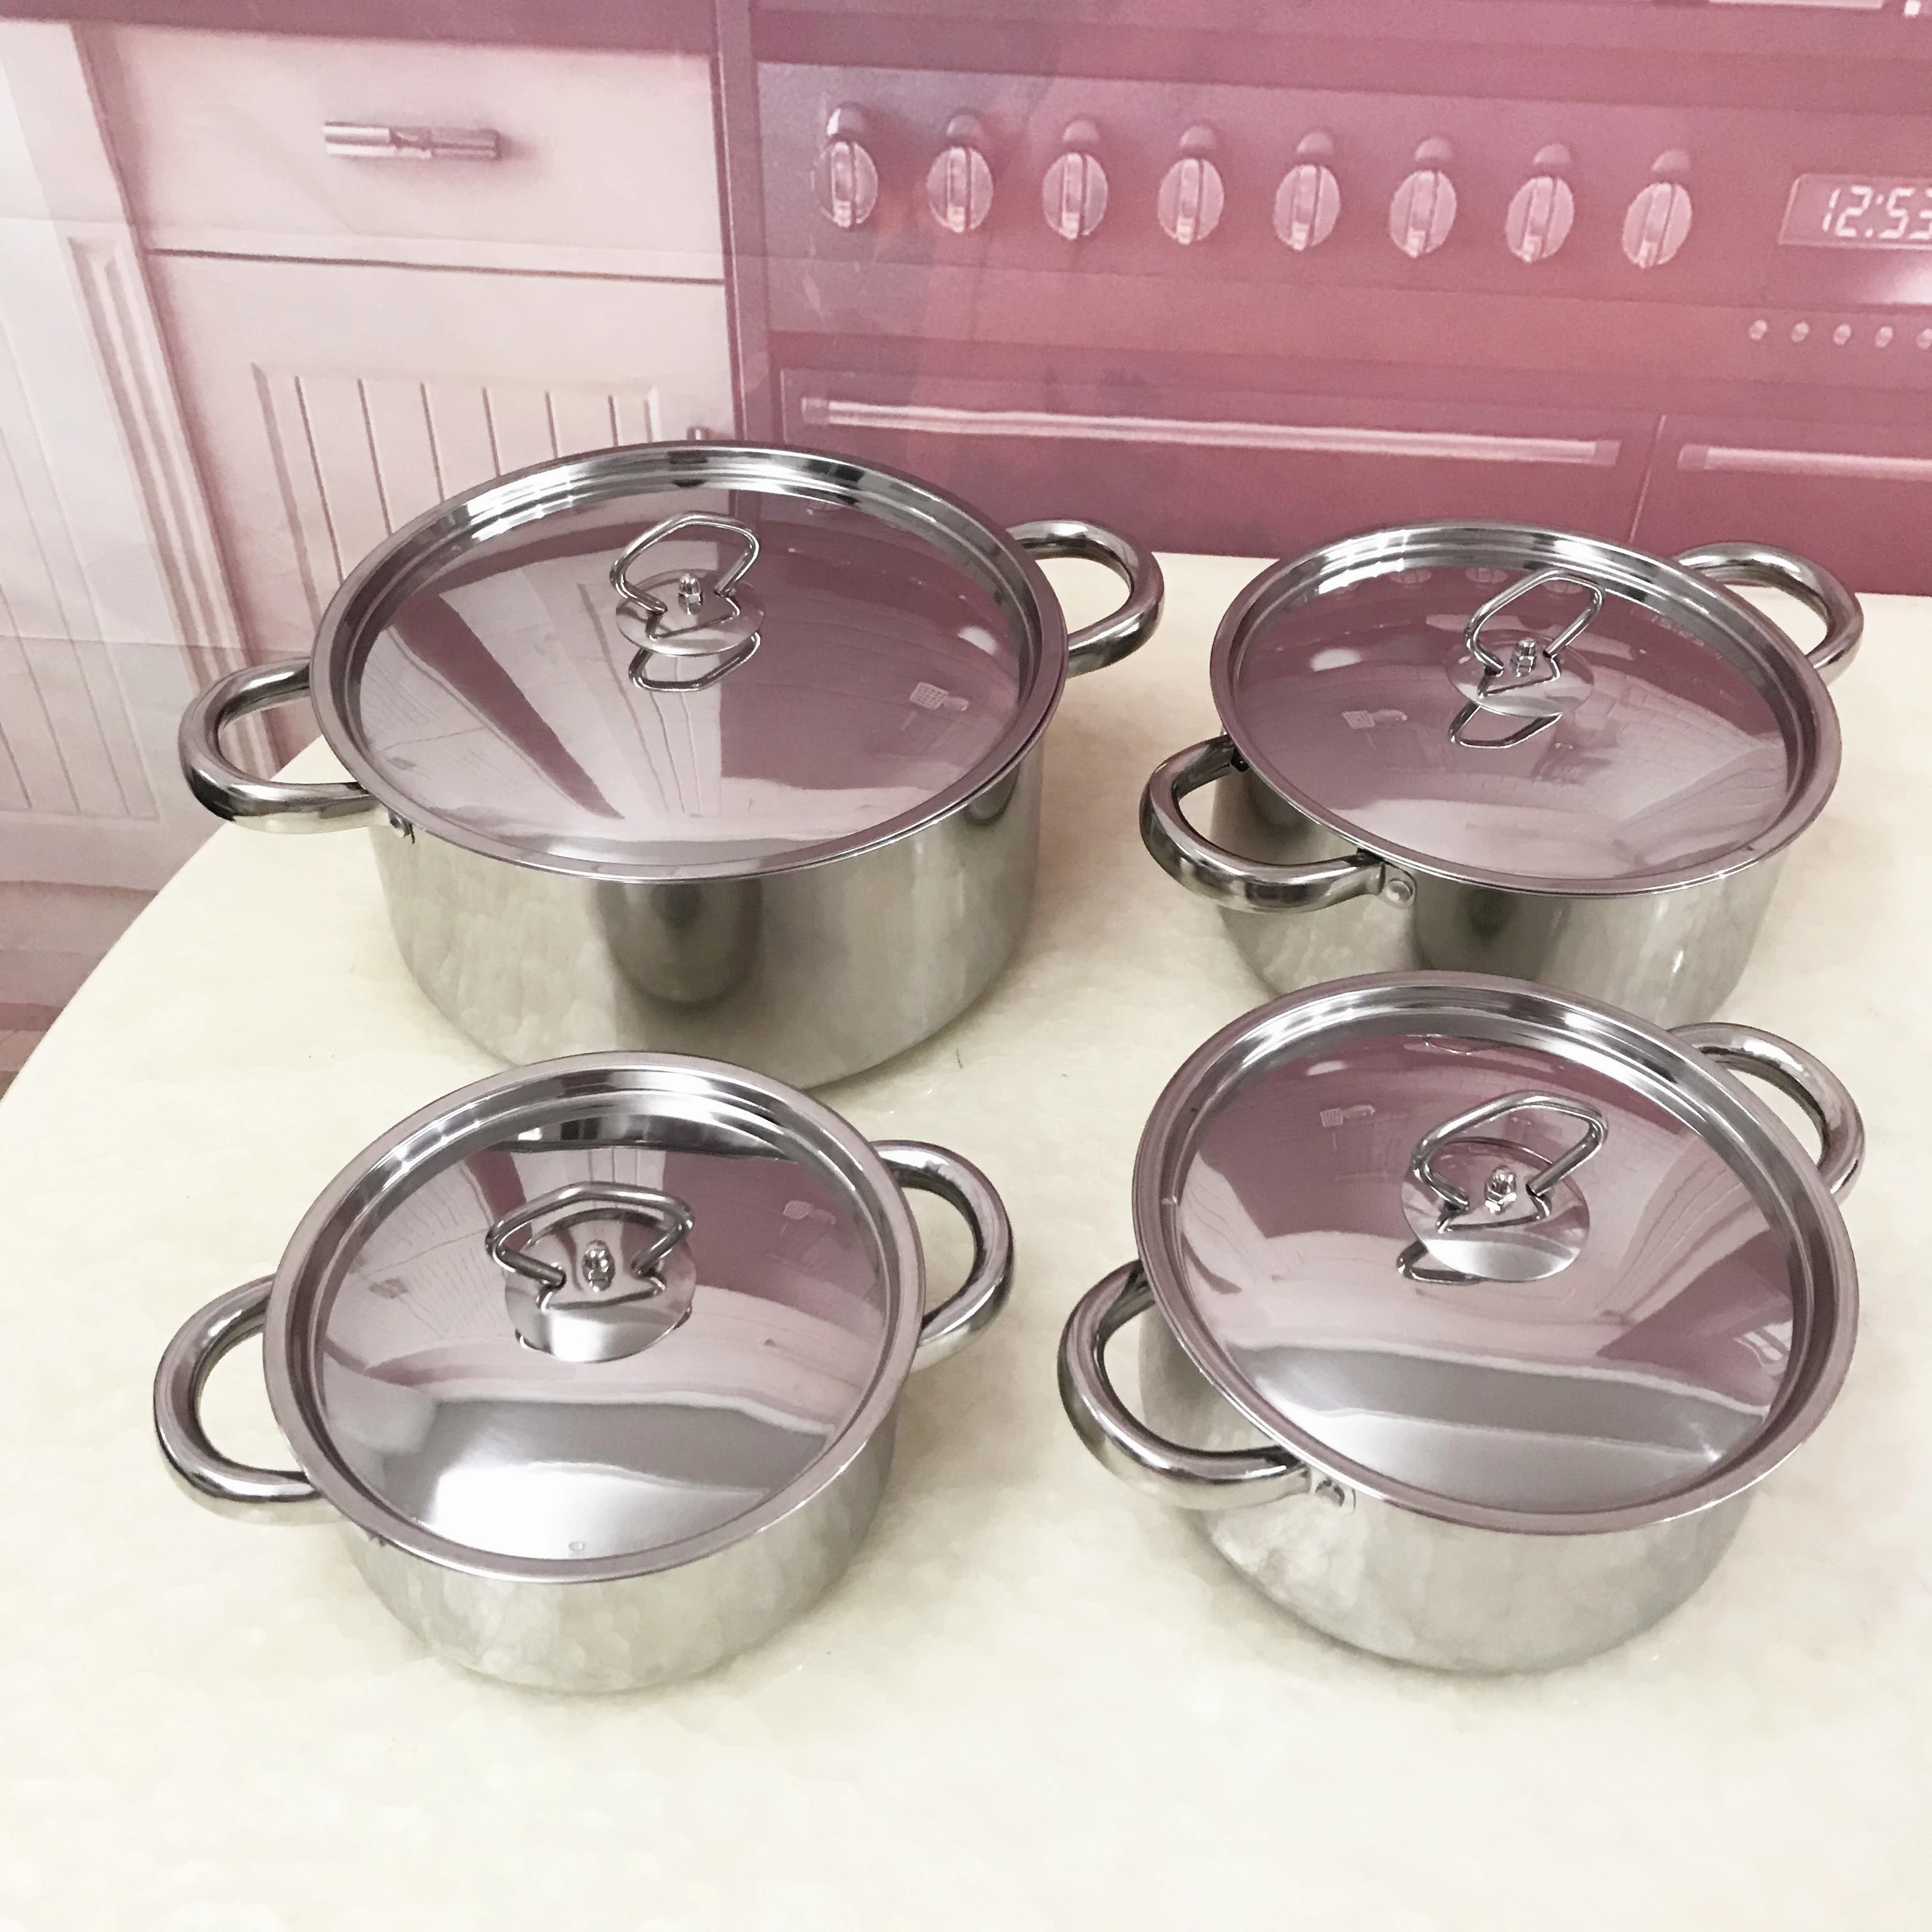 Kitchen Induction saucepan casserole cooking pots stainless steel cookware sets